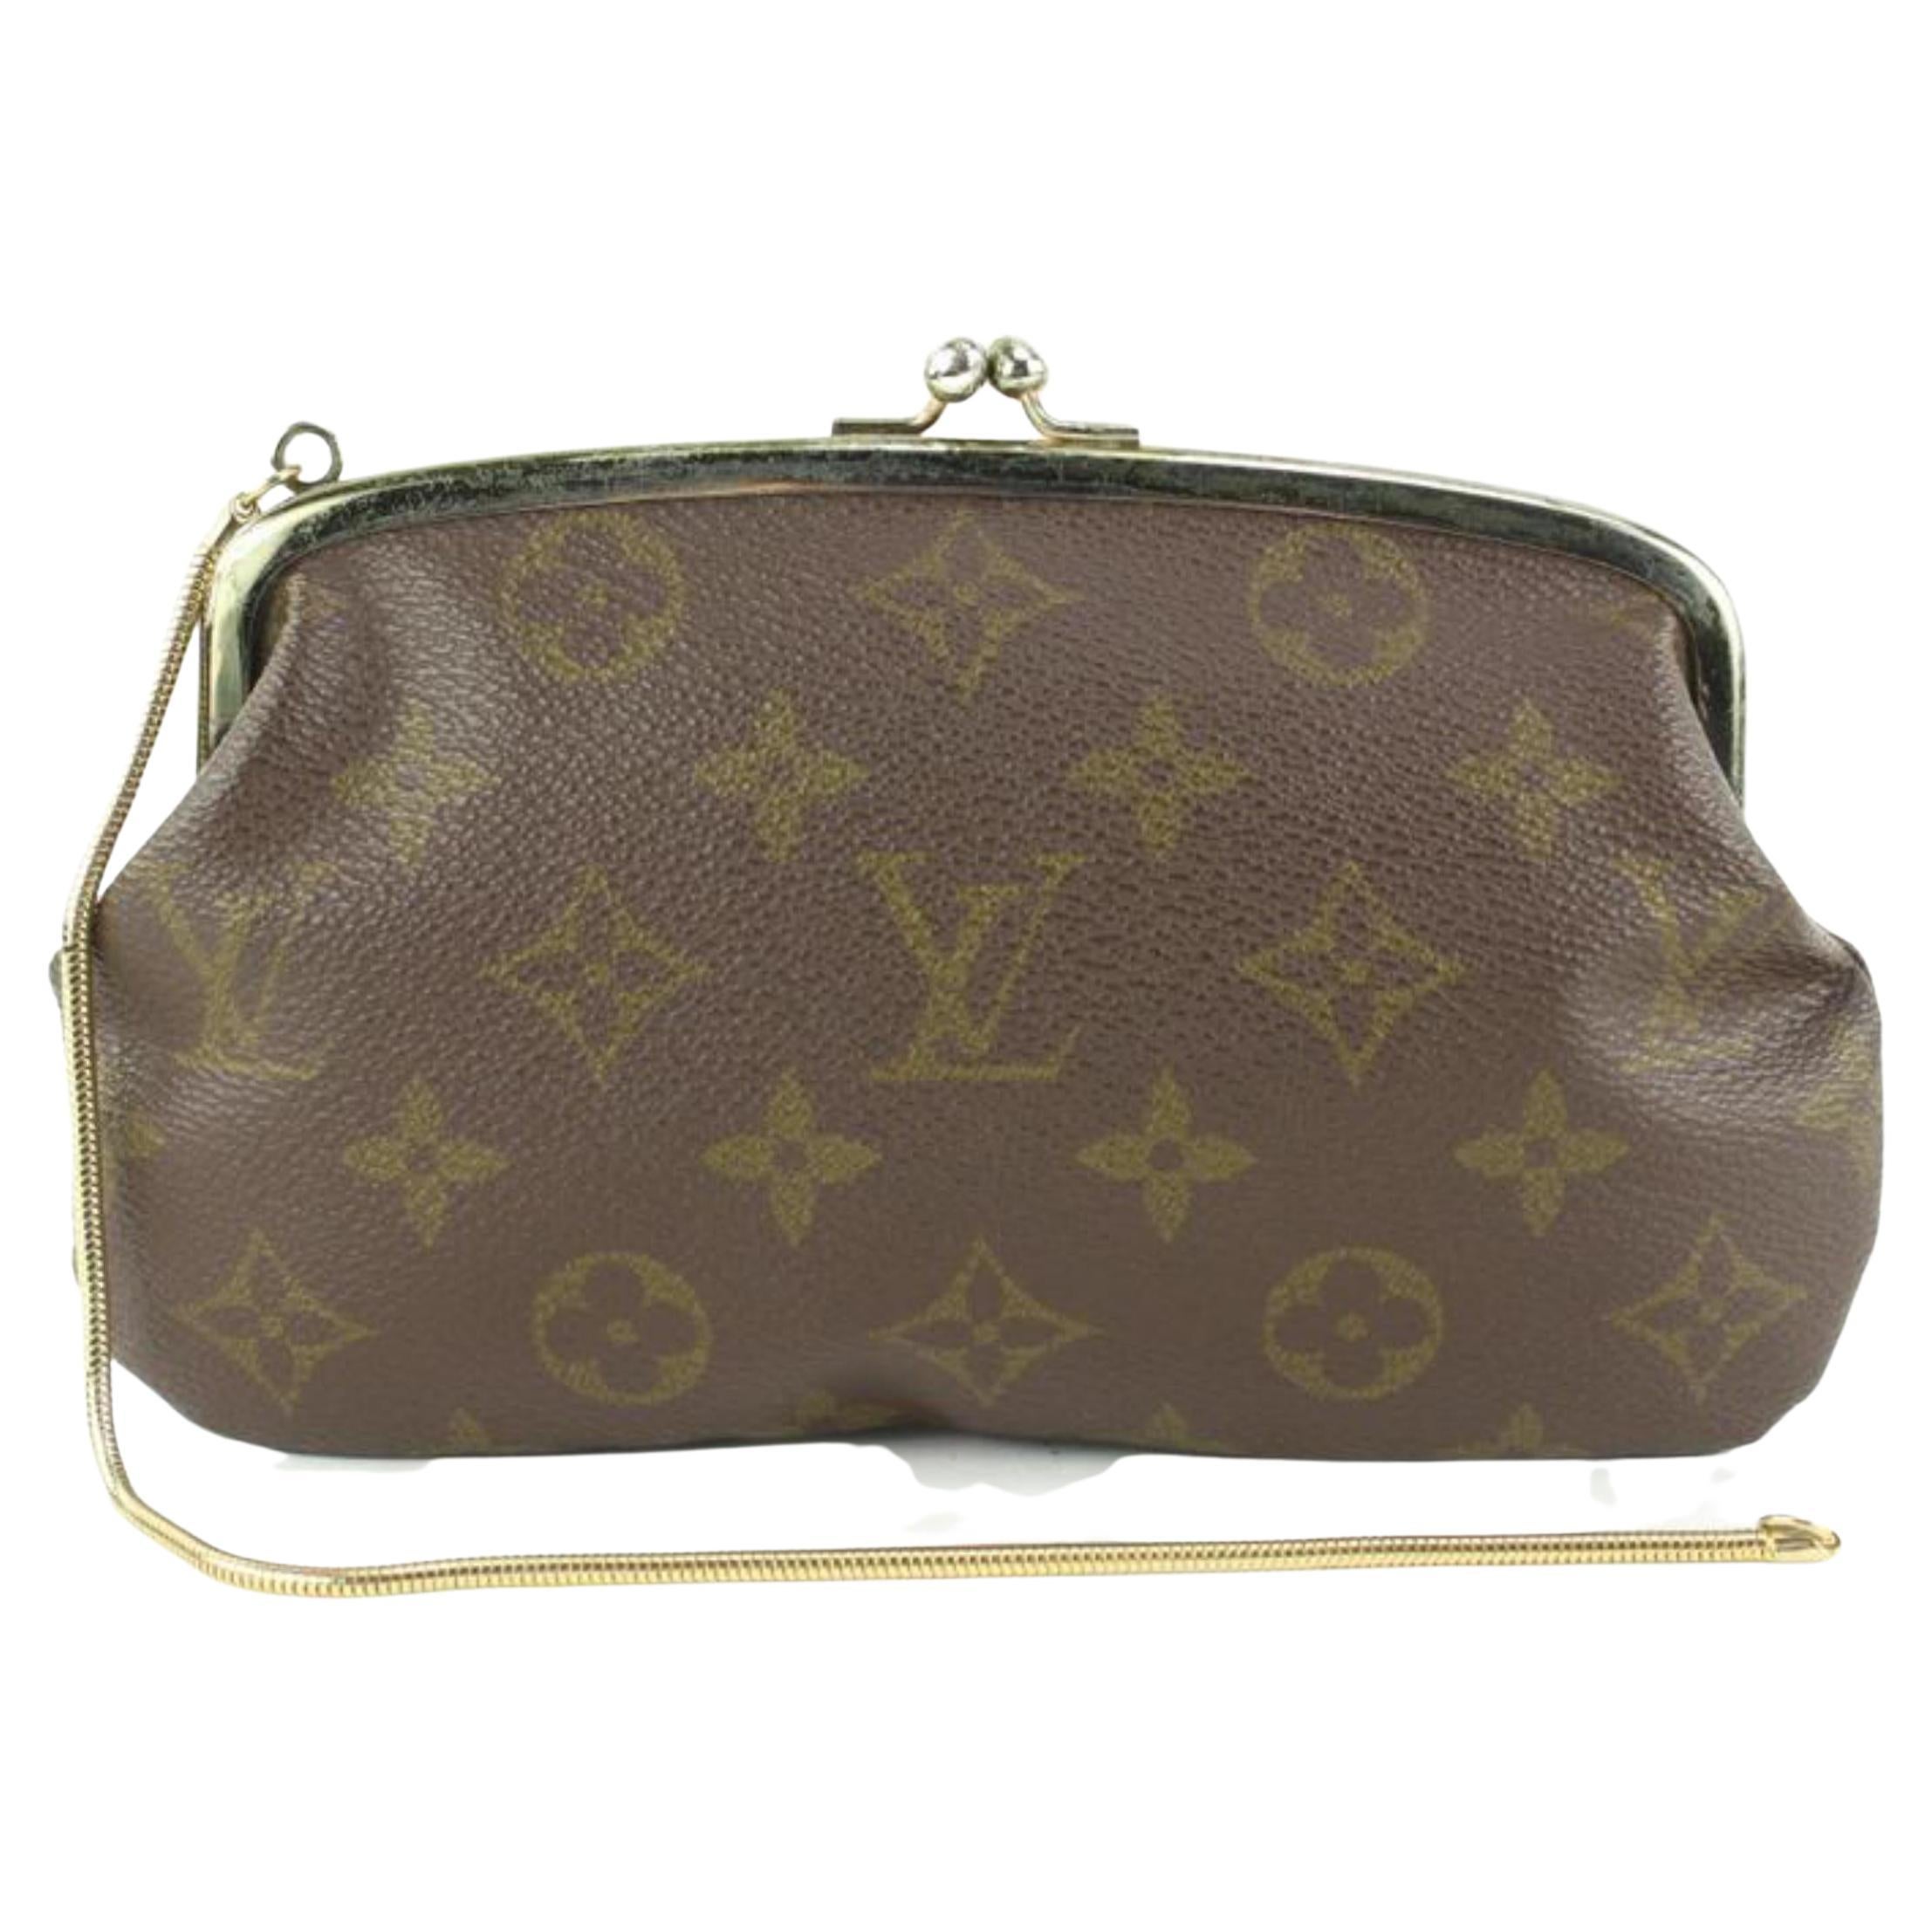 Telemacos Held og lykke storm Louis Vuitton Change Purse - 23 For Sale on 1stDibs | louis vuitton change  purses, louis vuitton change bag, vintage louis vuitton change purse